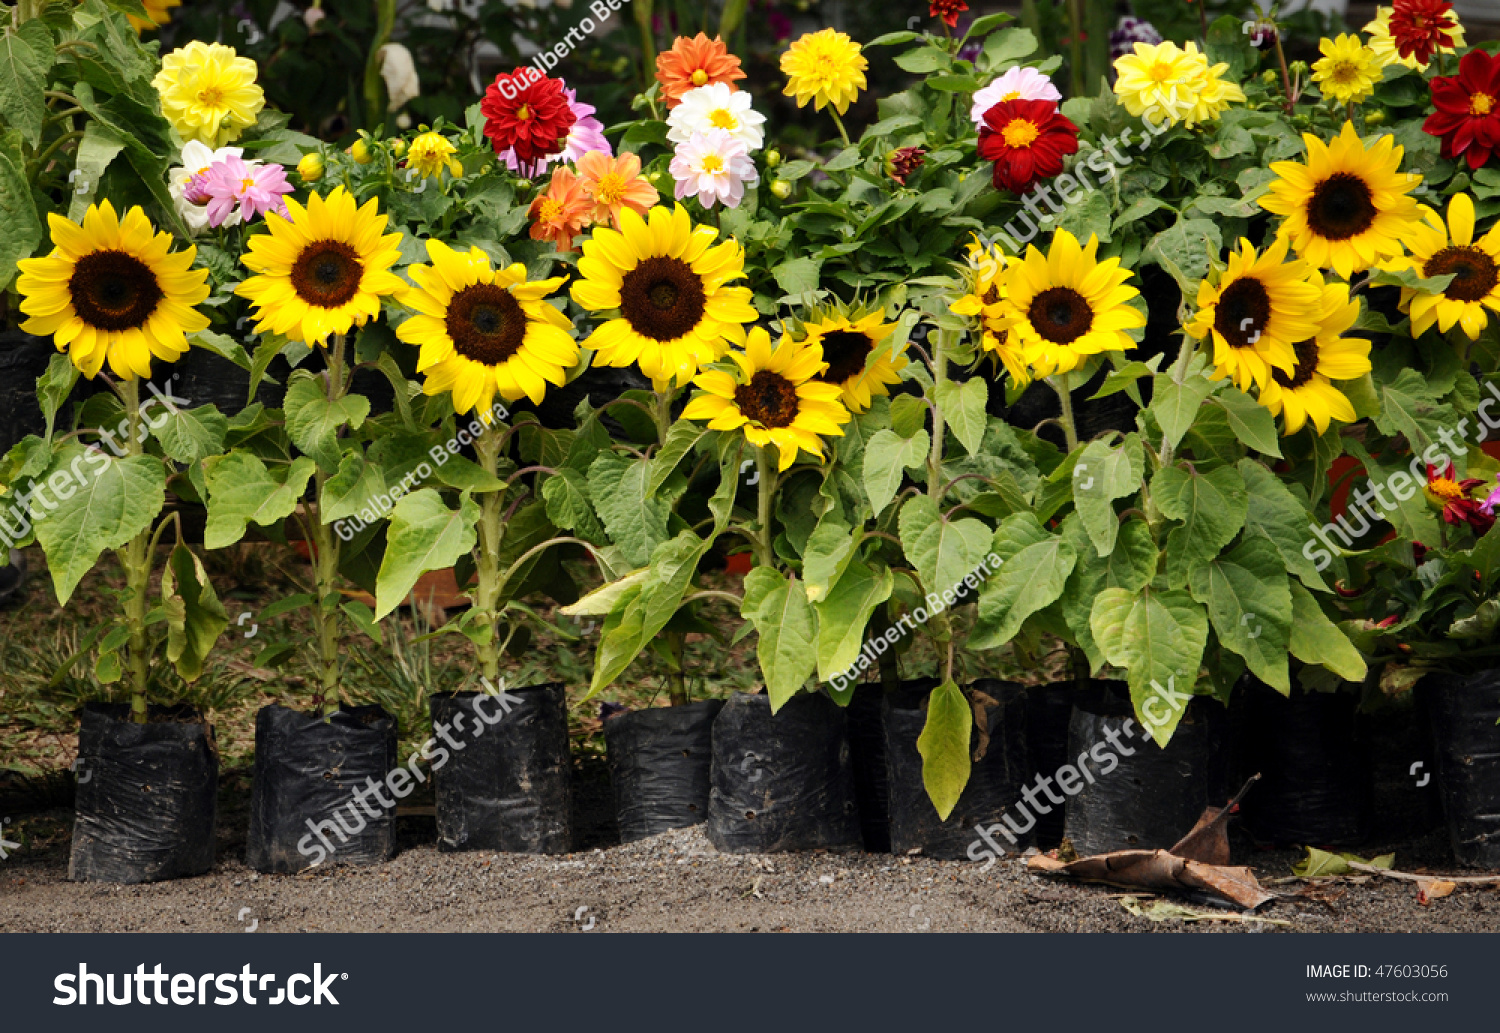 beautiful sunflower plants together other flowers stockfoto